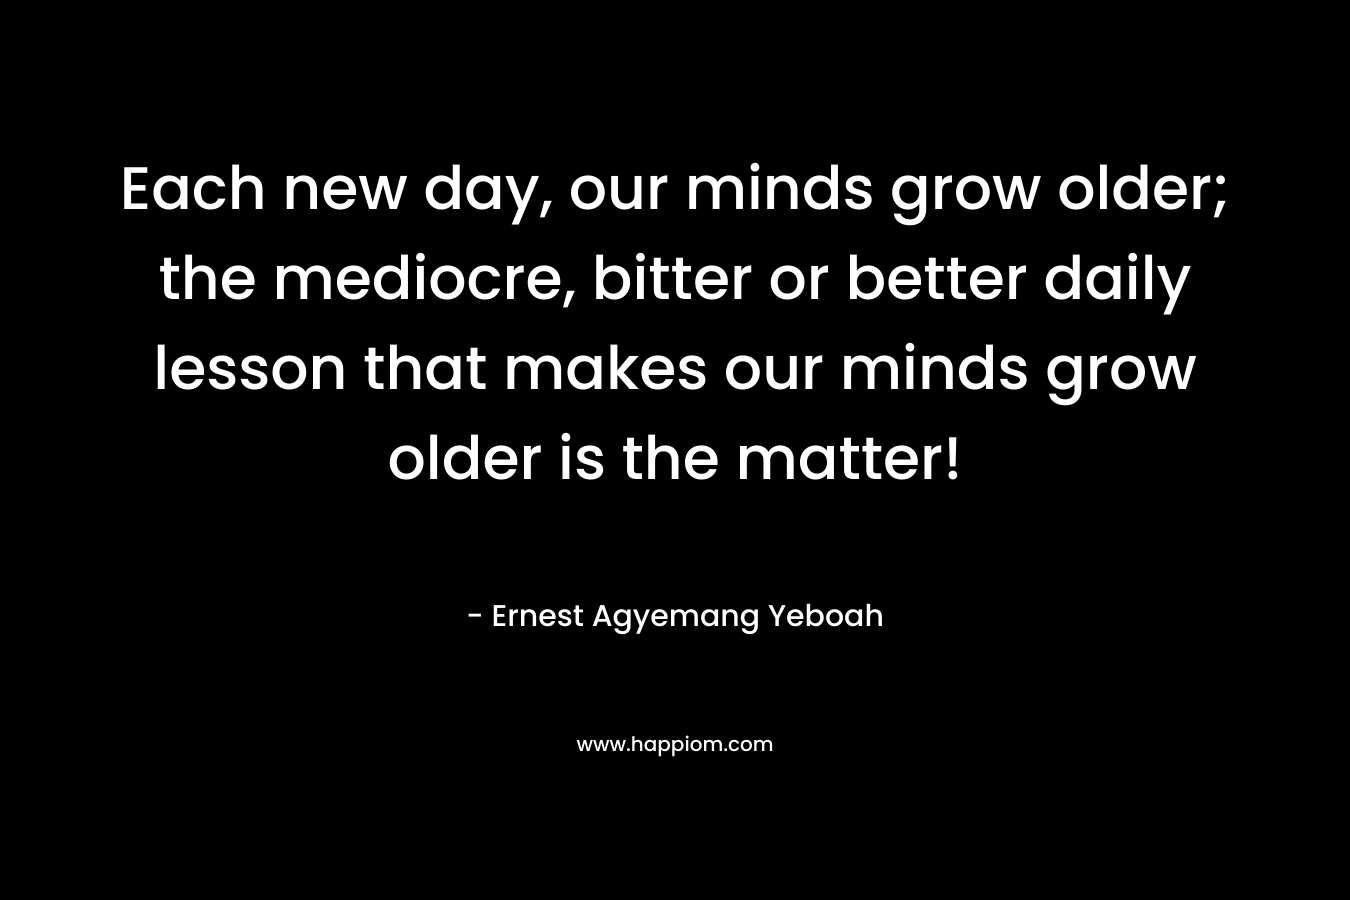 Each new day, our minds grow older; the mediocre, bitter or better daily lesson that makes our minds grow older is the matter!